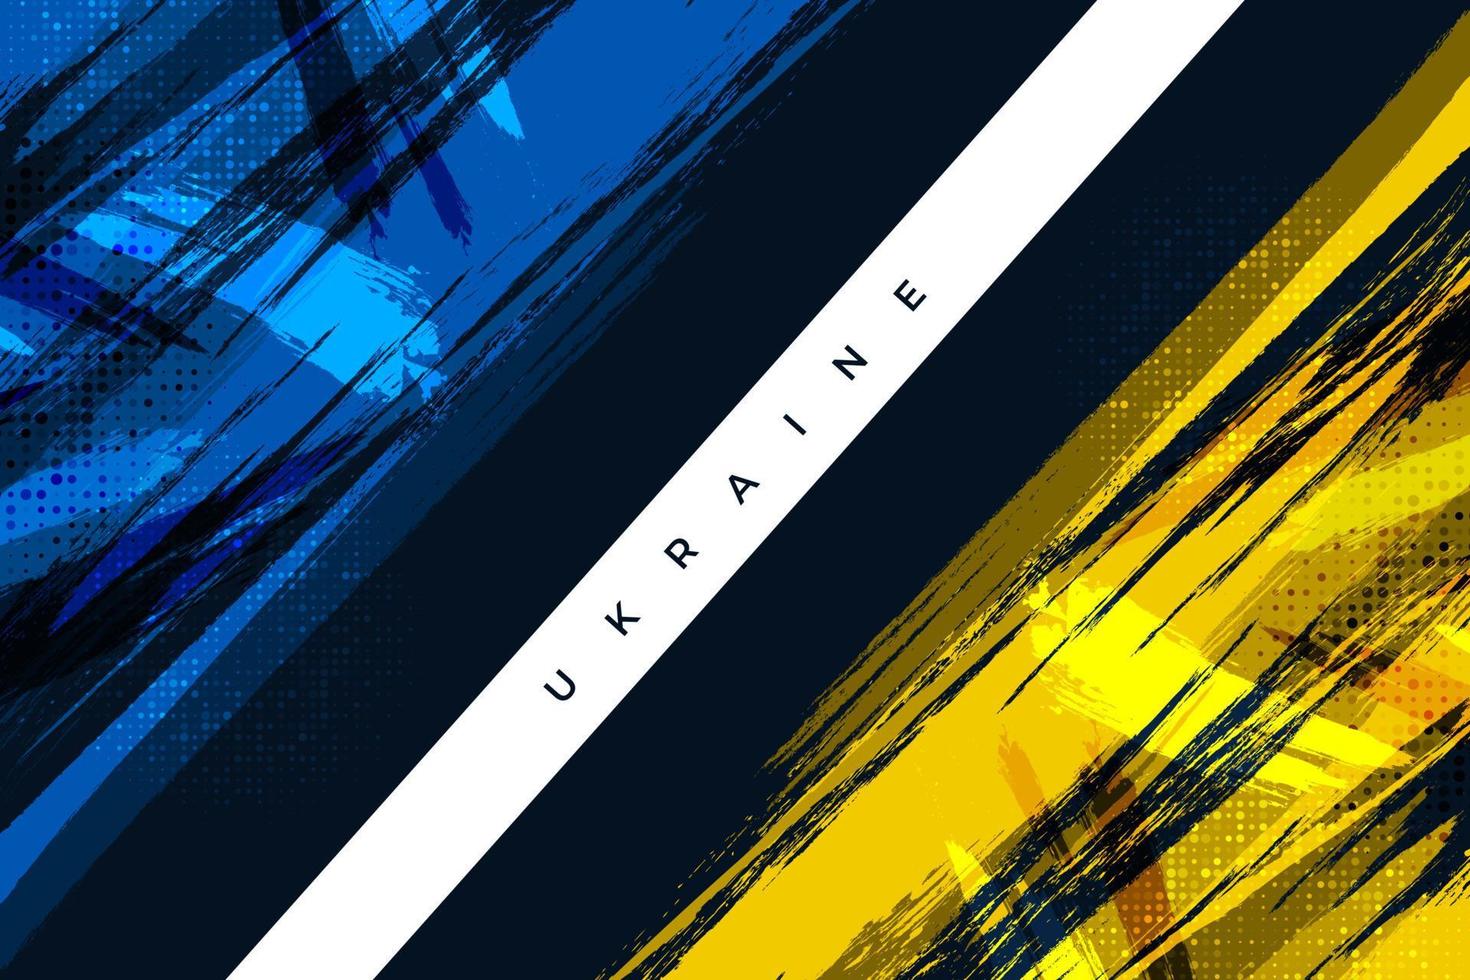 Ukraine Flag with Grunge and Brush Concept Isolated on Dark Background. Ukraine Background with Brush Style and Halftone Effect vector